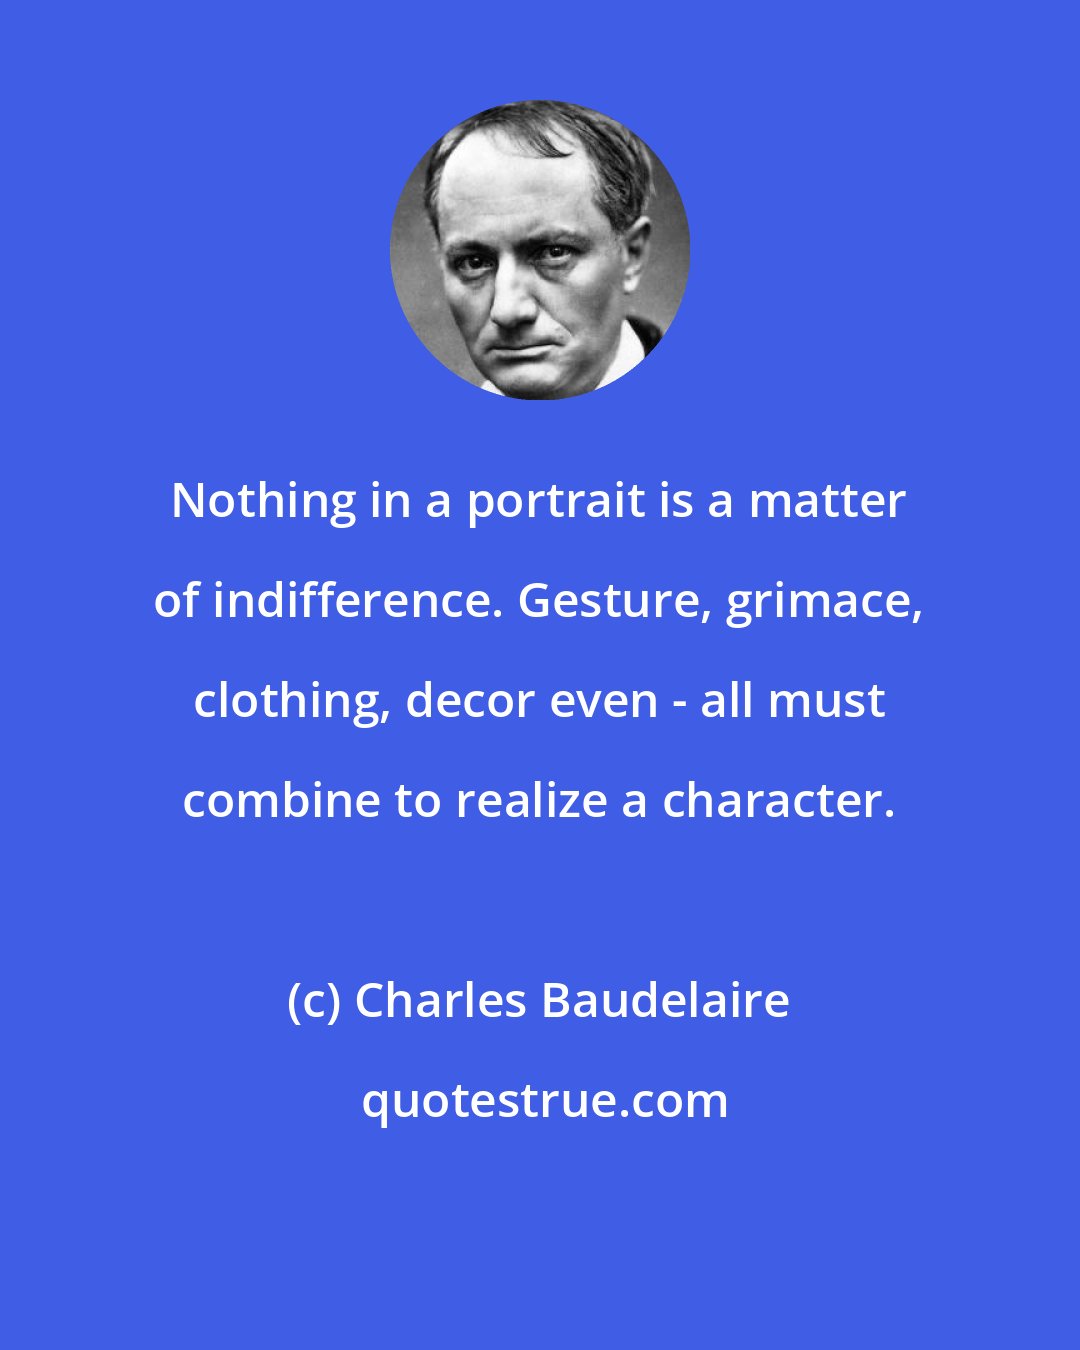 Charles Baudelaire: Nothing in a portrait is a matter of indifference. Gesture, grimace, clothing, decor even - all must combine to realize a character.